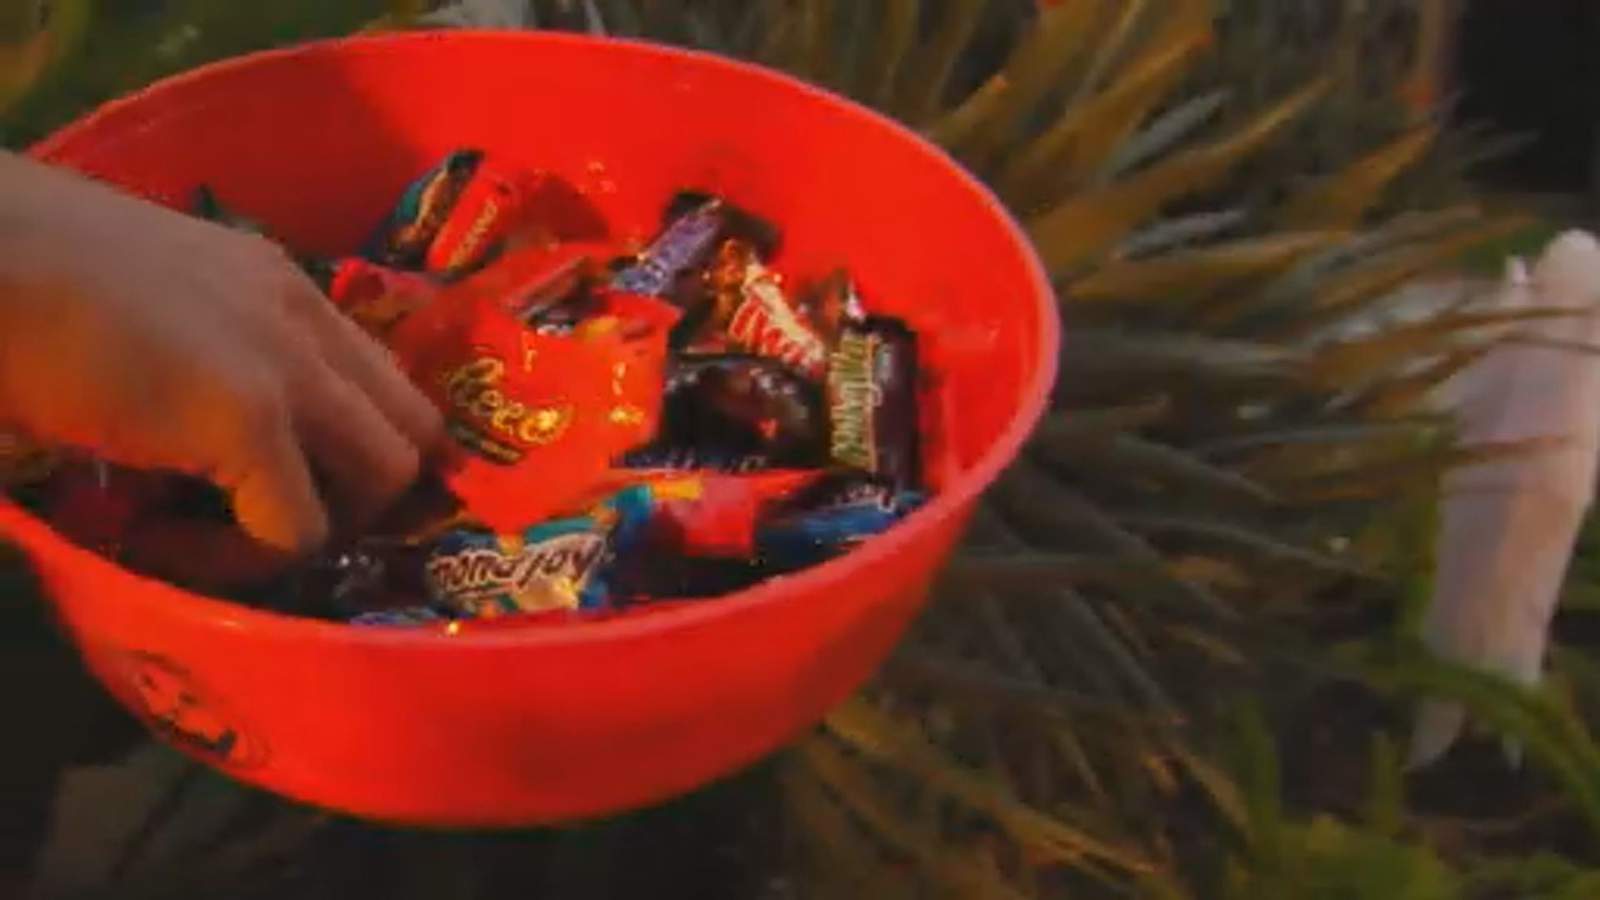 How to safely enjoy trick-or-treating during COVID-19 pandemic